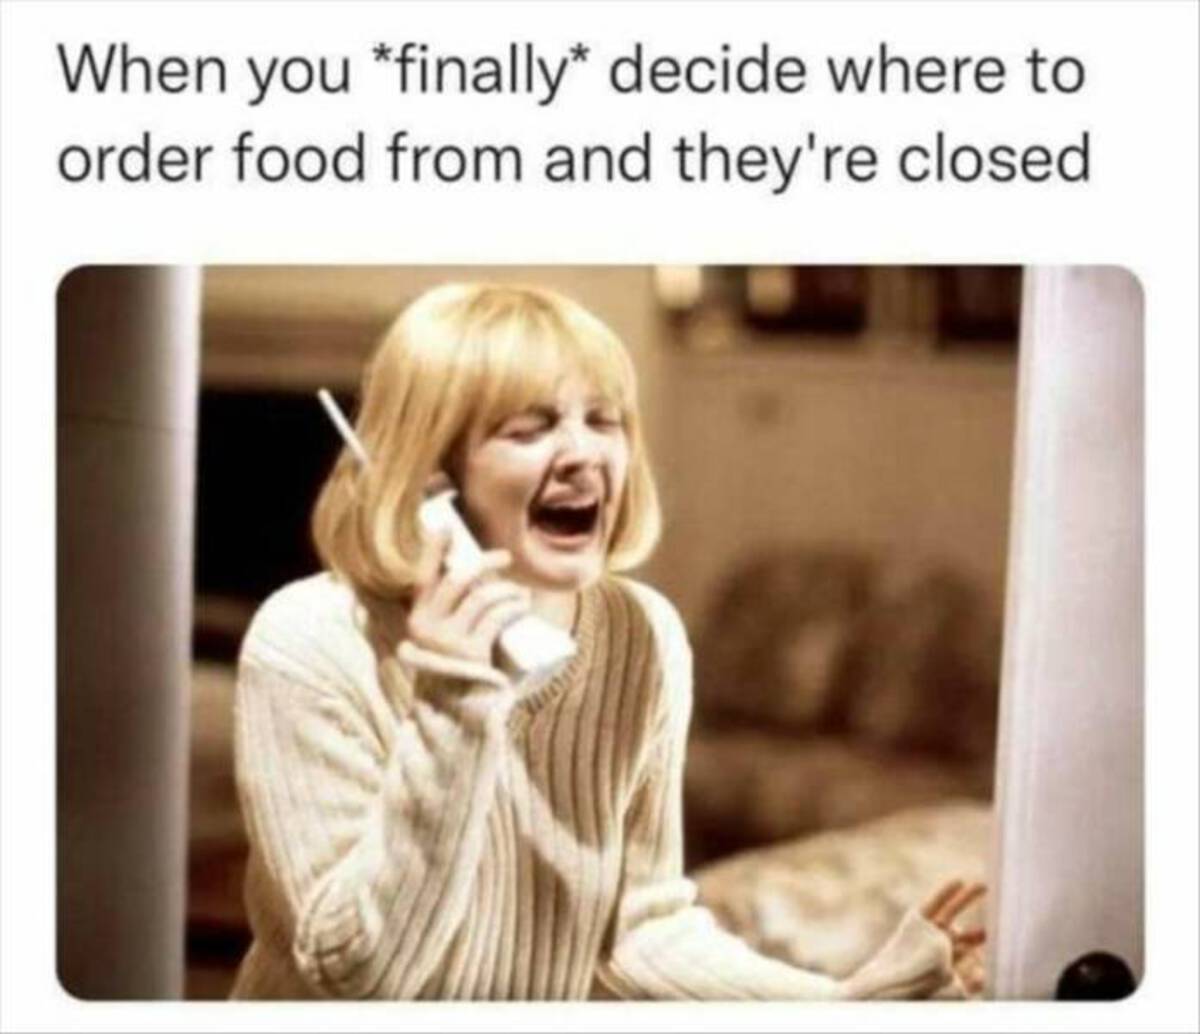 photo caption - When you finally decide where to order food from and they're closed 1